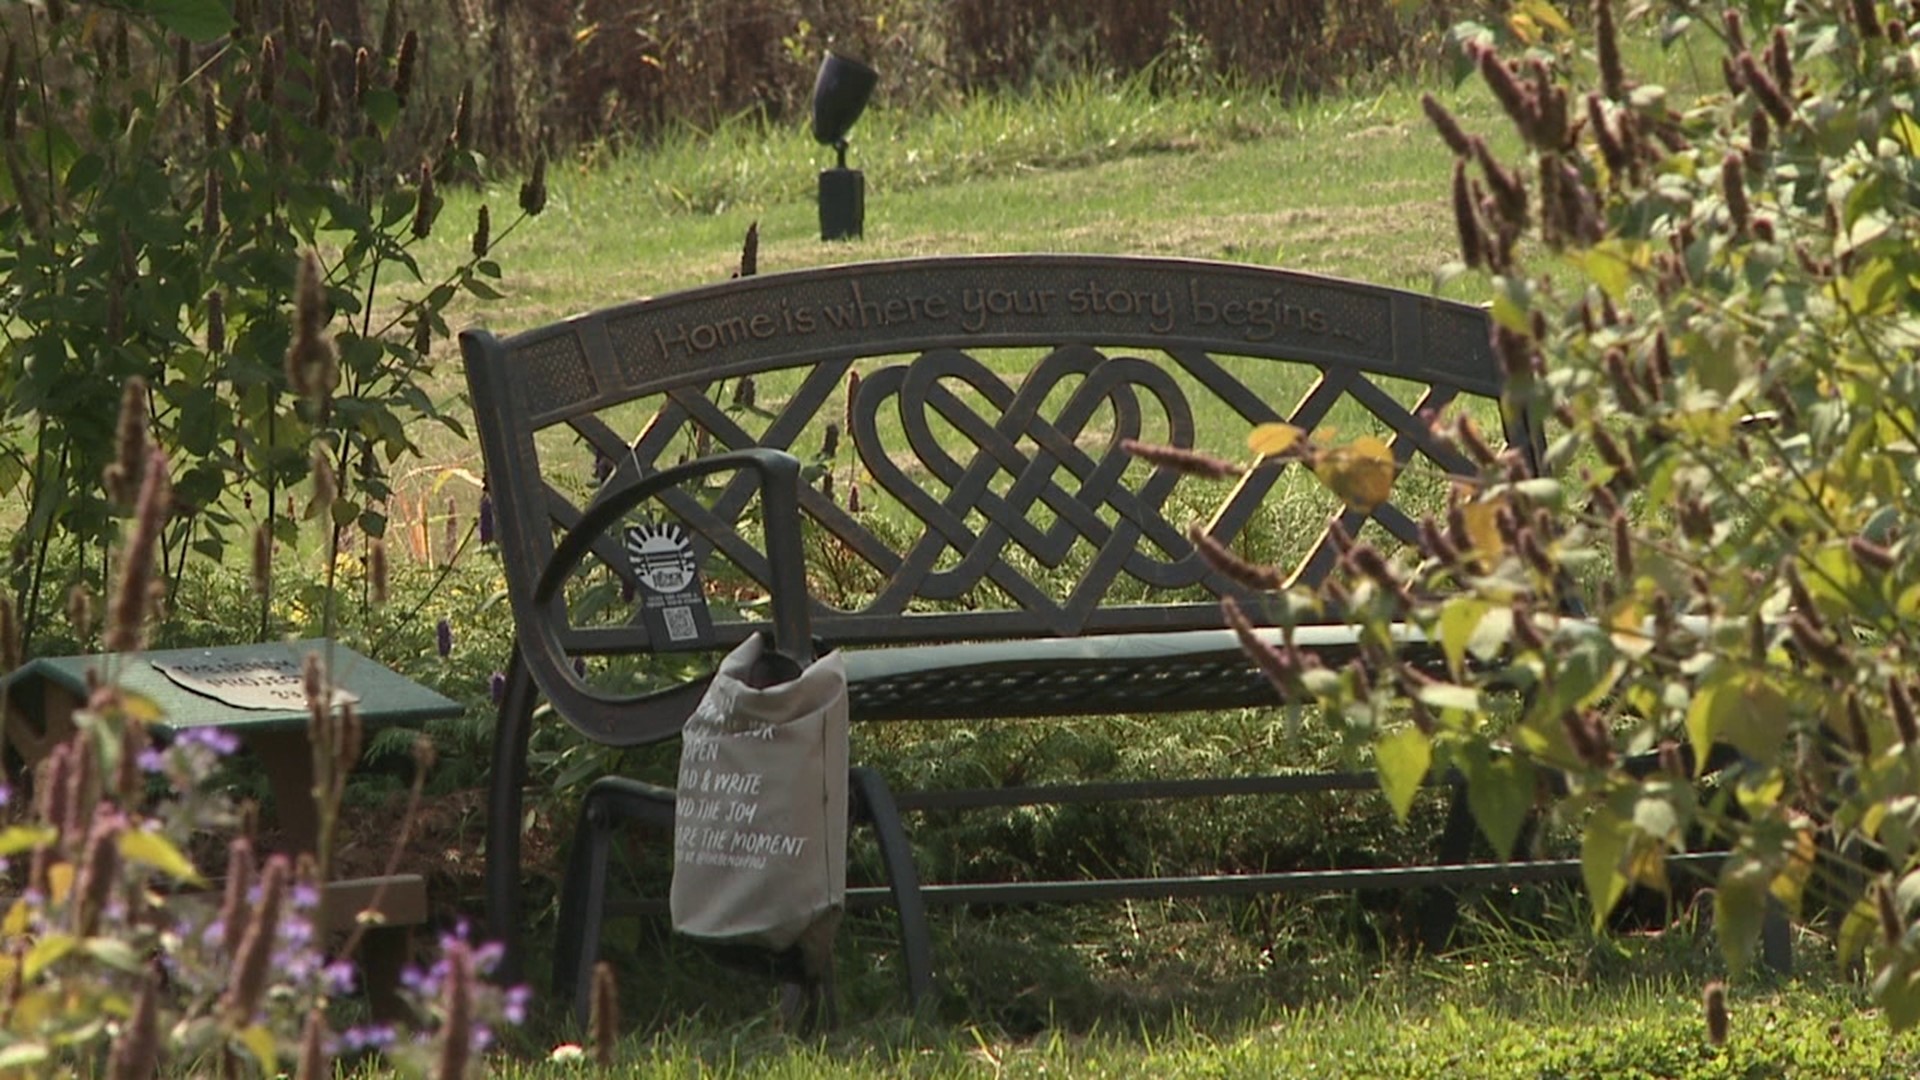 The Bench Project held a walk at a farm in Shavertown to benefit a group aimed at helping veterans.